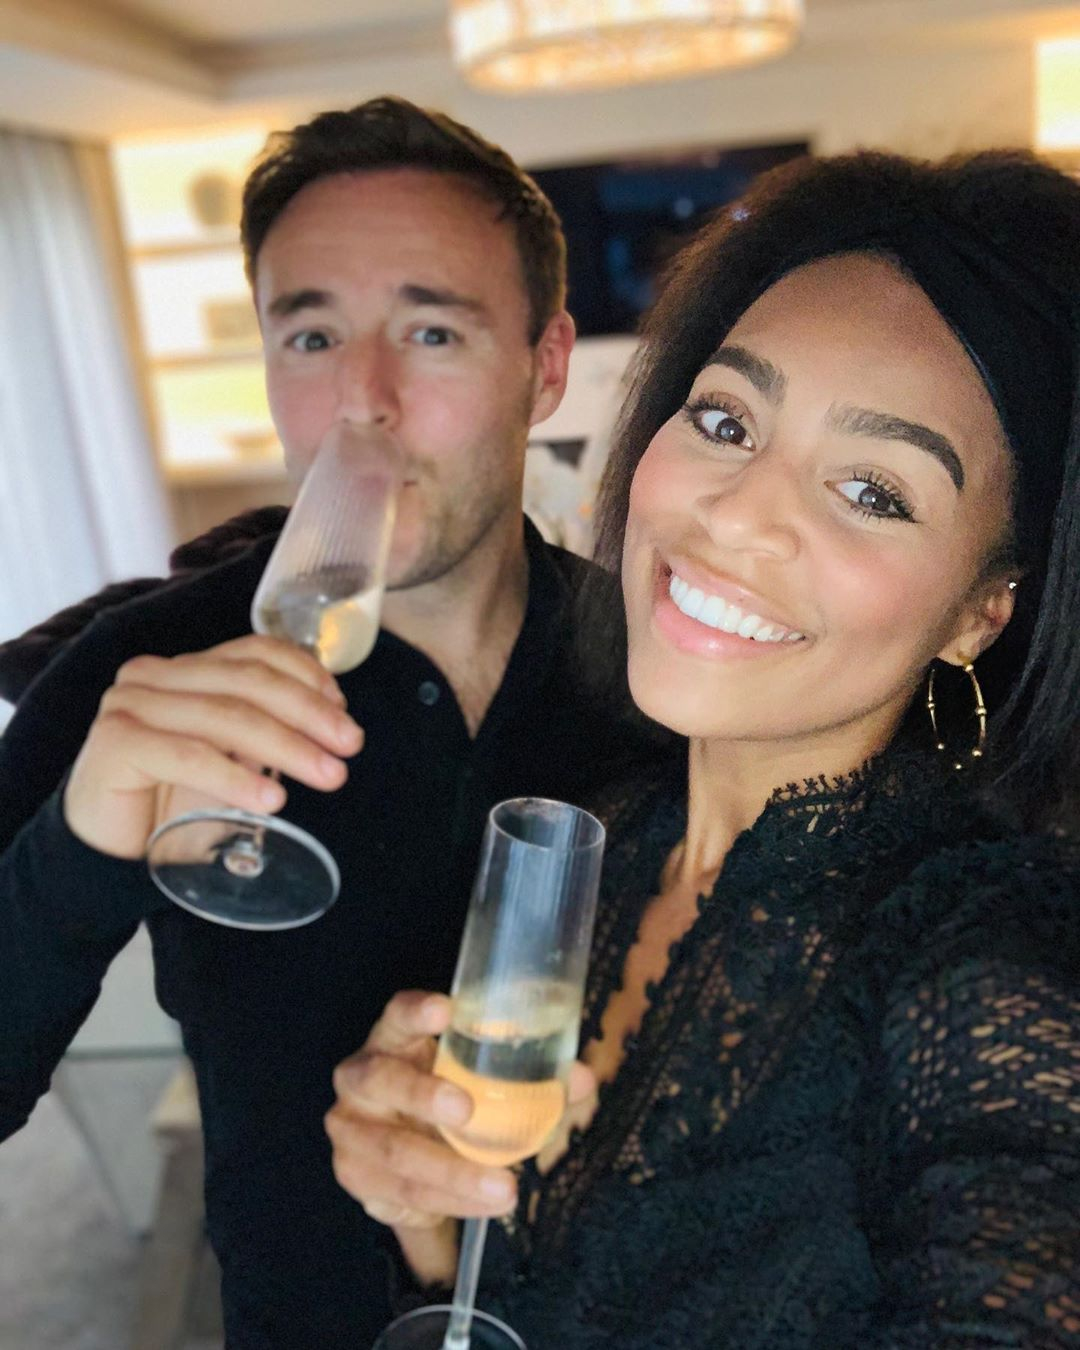 Coronation Street’s Alan Halsall makes heartbreaking confession about ‘clearing his mind’ after split with Tisha Merry